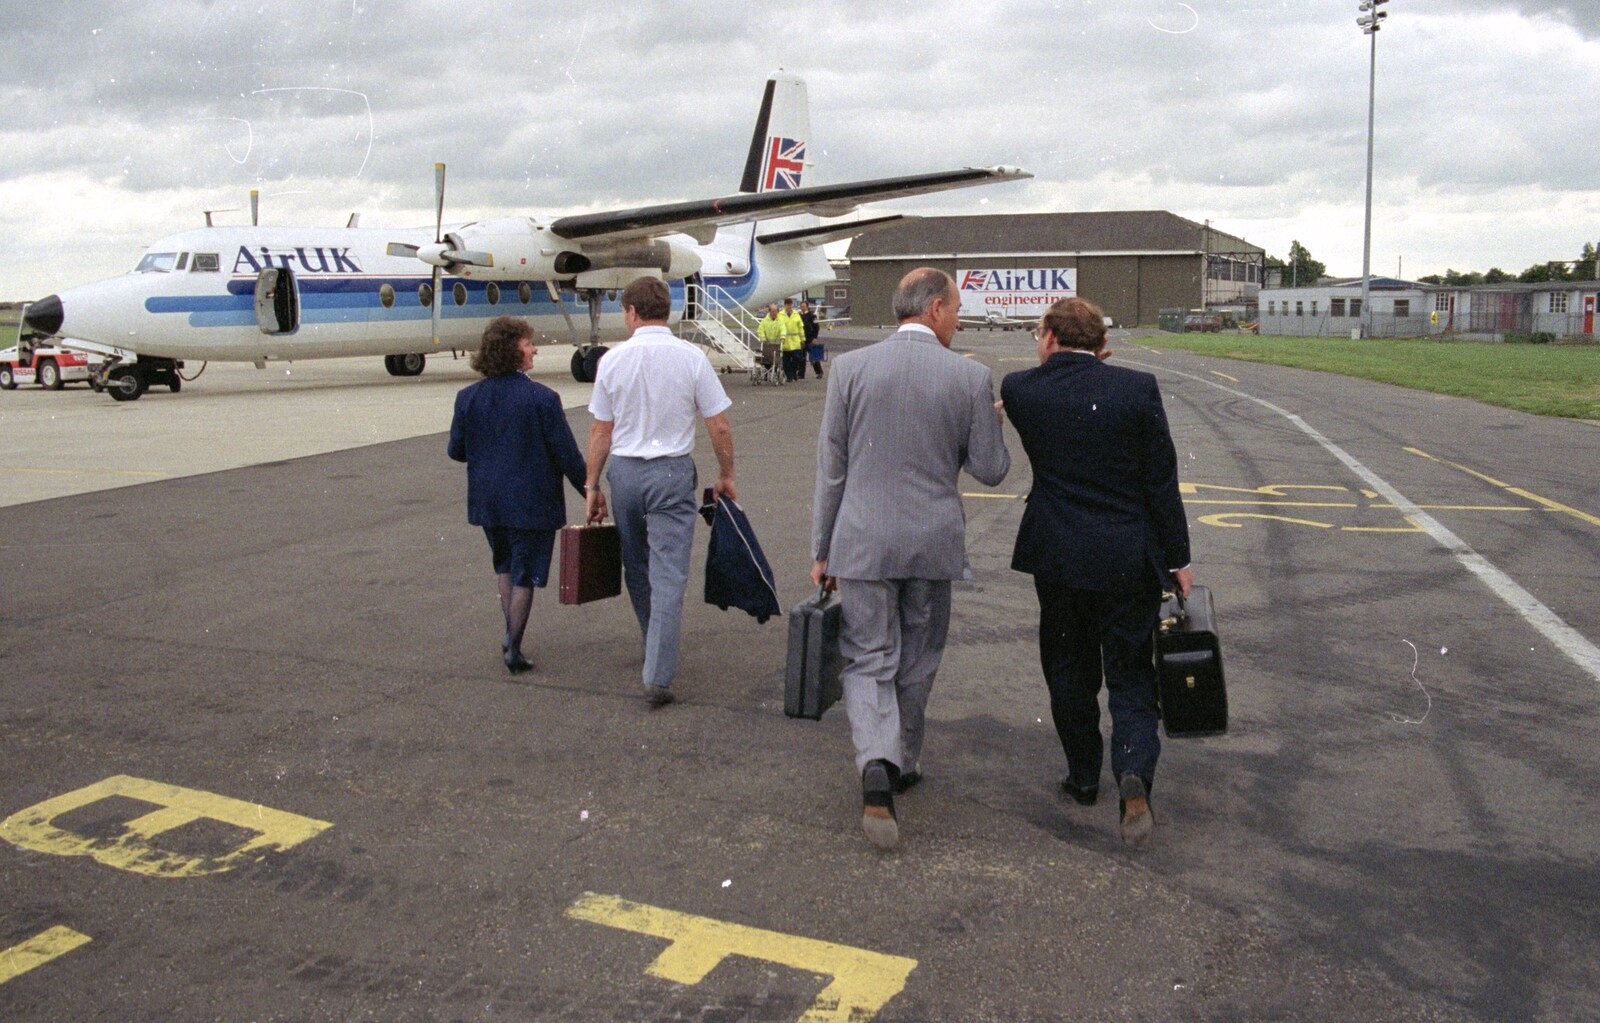 Stuston Sewerage and Kate's Printec Birthday, Scole Inn, Norfolk and Suffolk - 2nd August 1990: Keith Clarke and Mike Perkins stride out to the Air UK Dash-7 at Norwich Airport